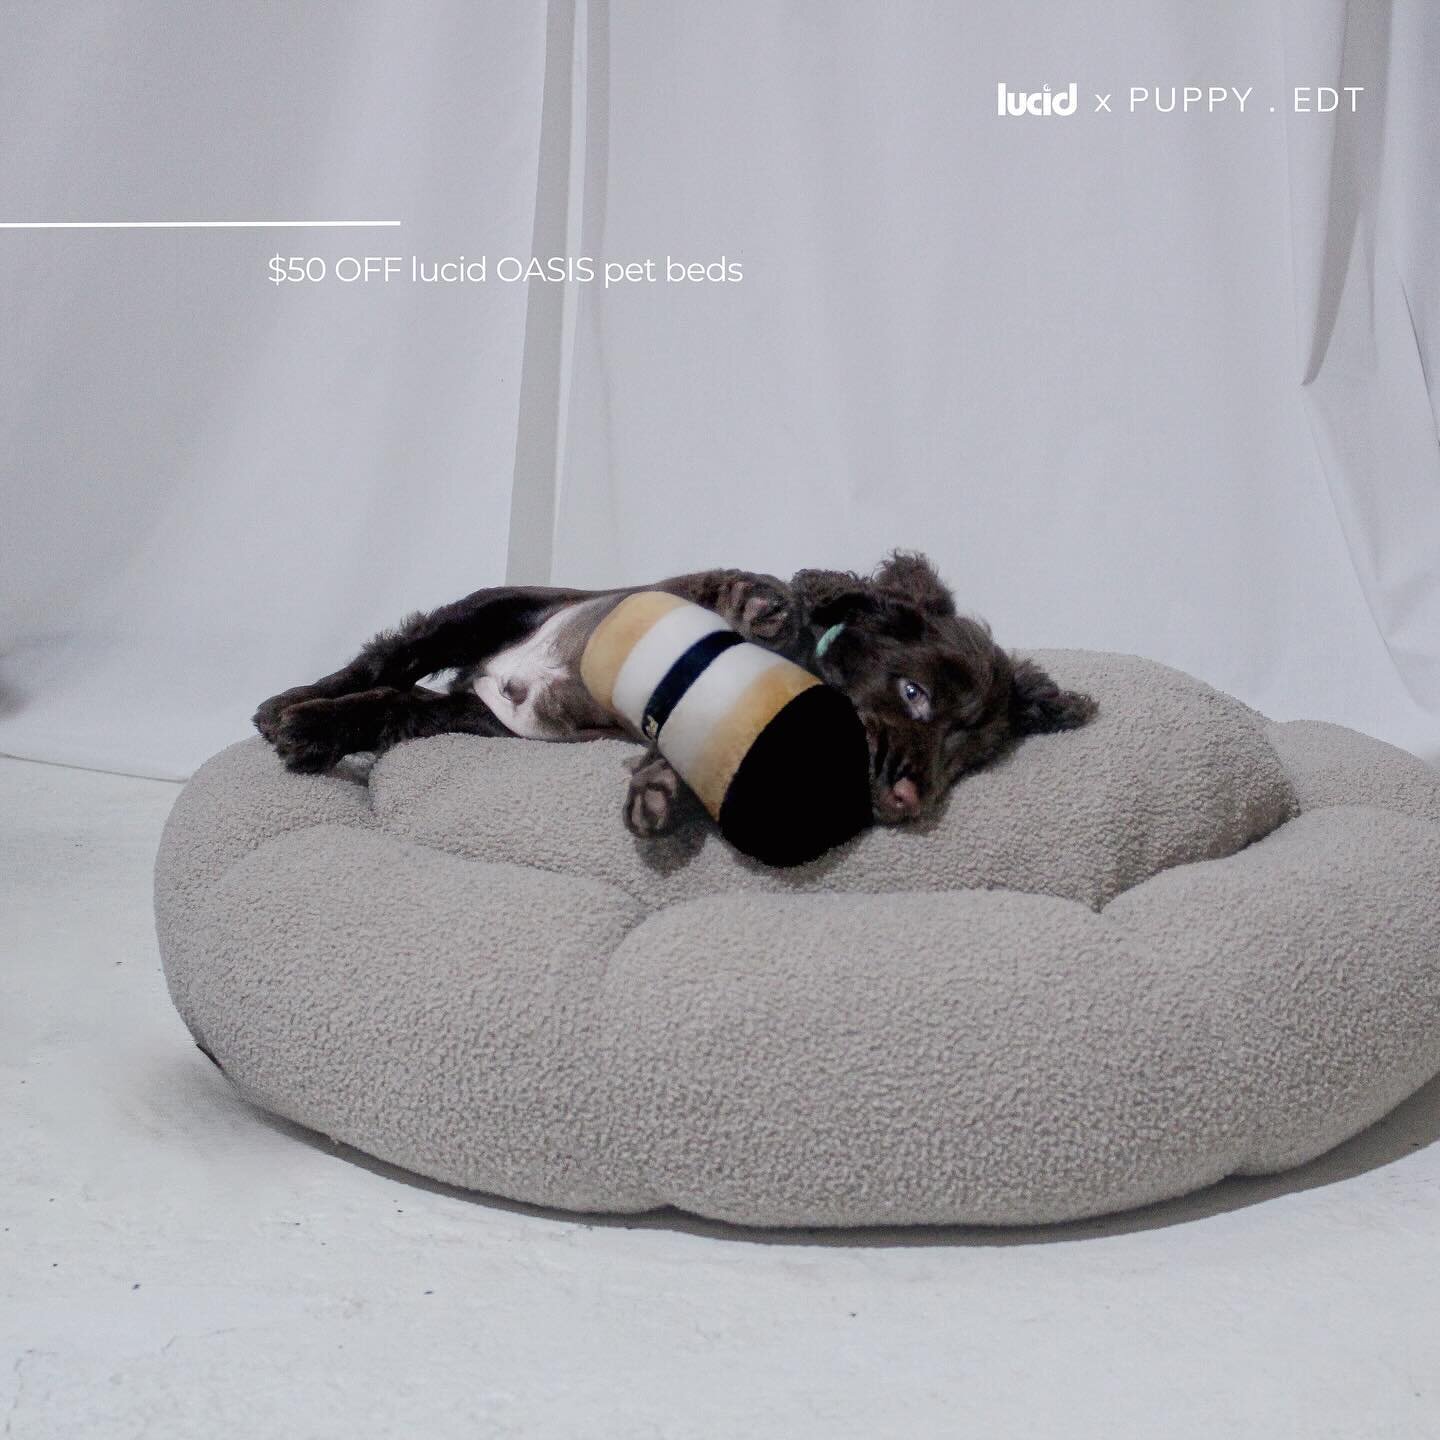 PUPPY . EDT featuring @fieldspaniel at @mindarcmade 

$50 off lucid OASIS pet bed for limited time

SHOP NOW
.
.
.
.
#petbed #spaniel #spanielpuppy #spanielpuppies #puppies #cutepuppies #officedogs #officepuppy #interior #interiordecor #livingroomide